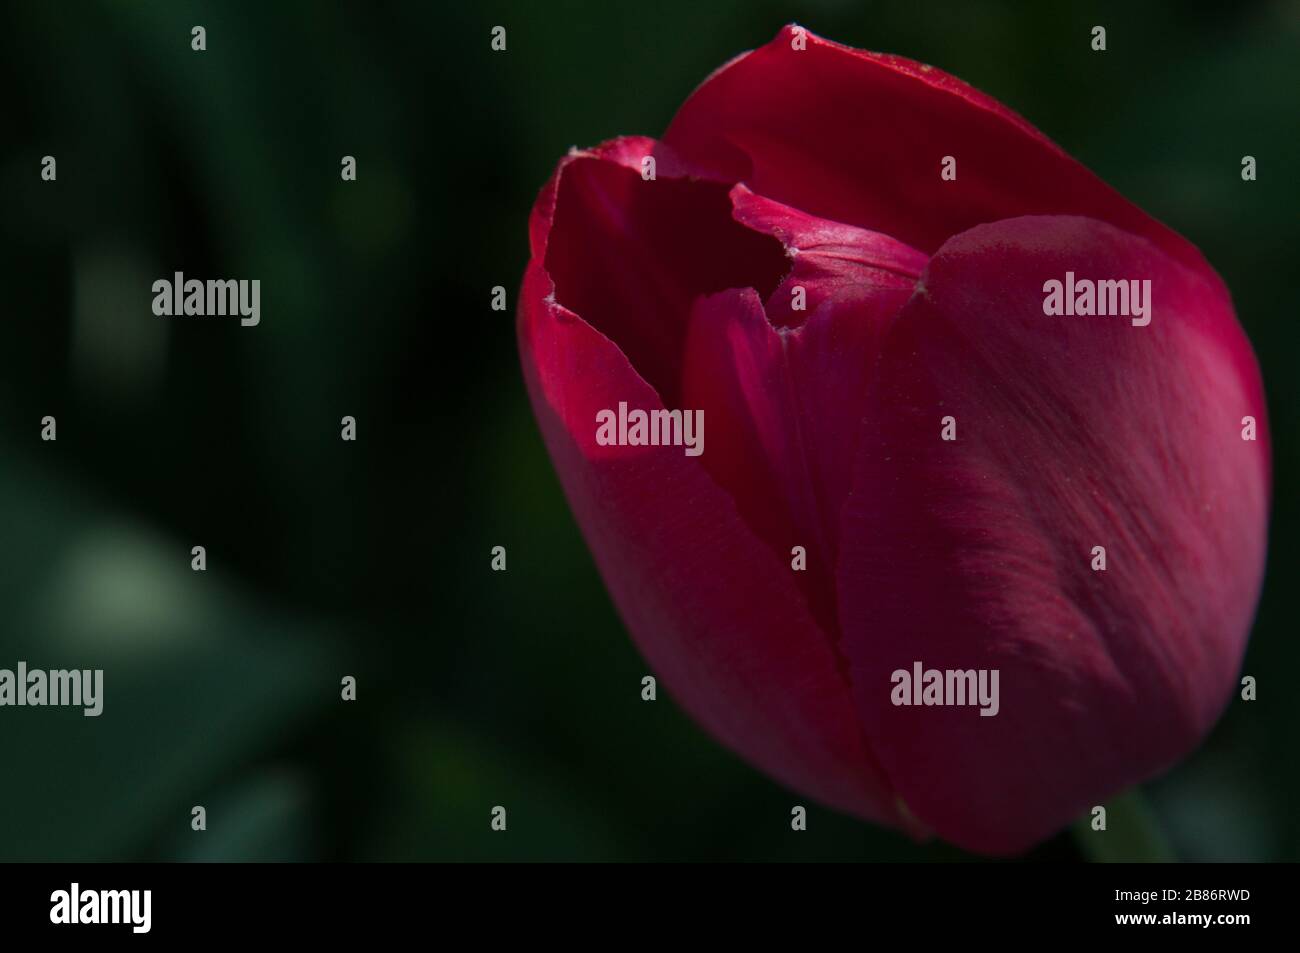 A dark pink tulip close-up view with a dark-green blurred background Stock Photo